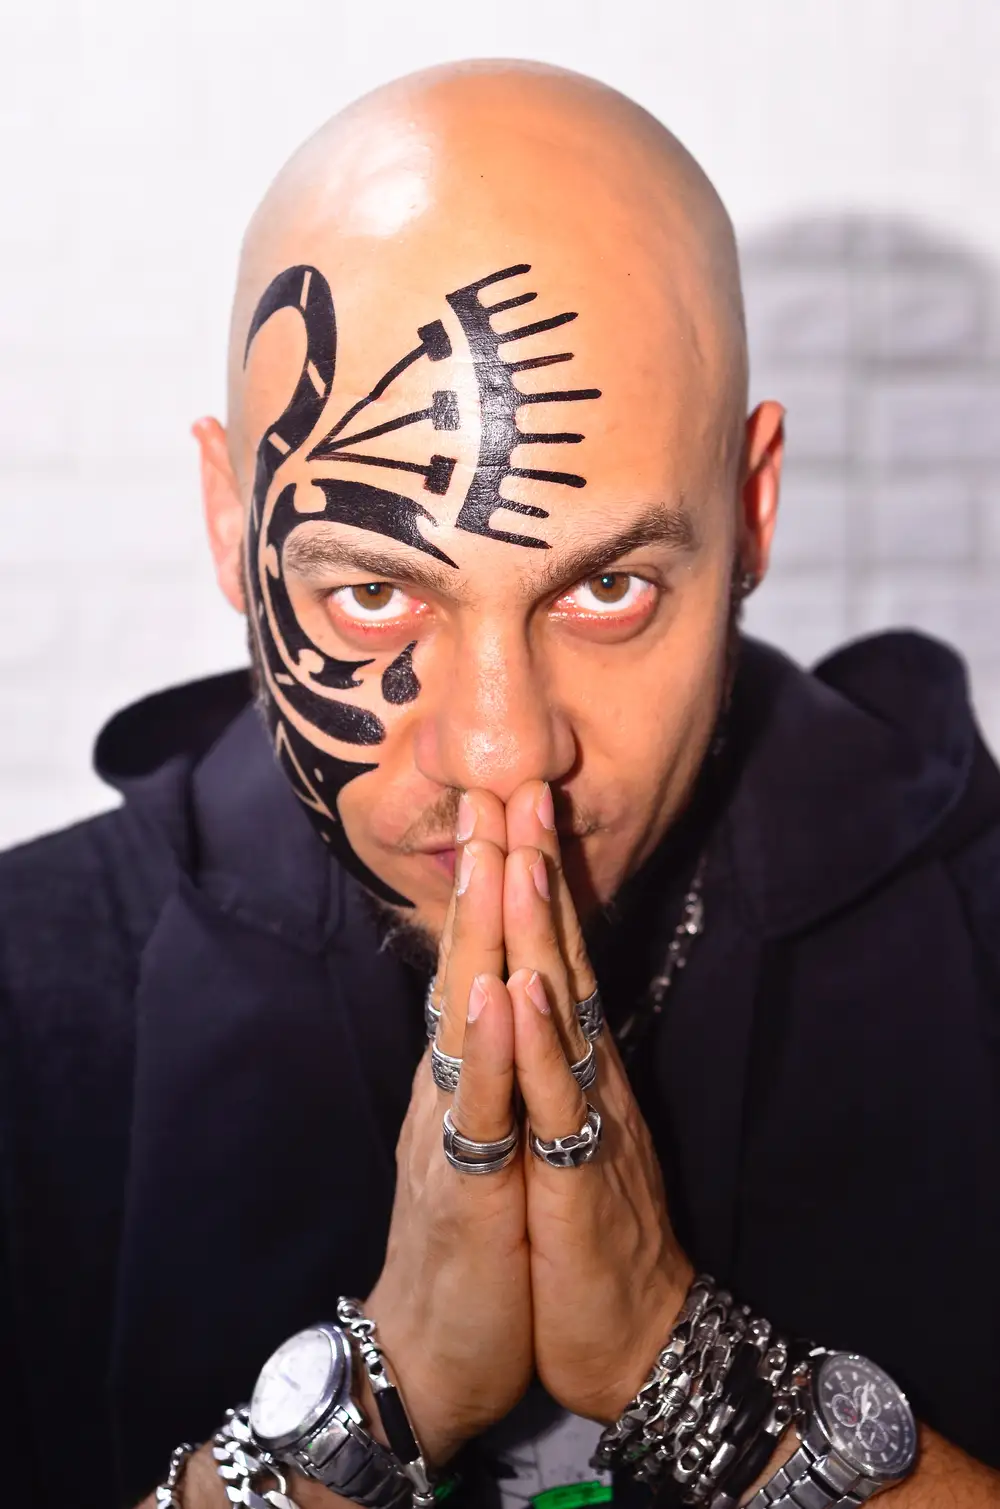 man with tattoo on his face